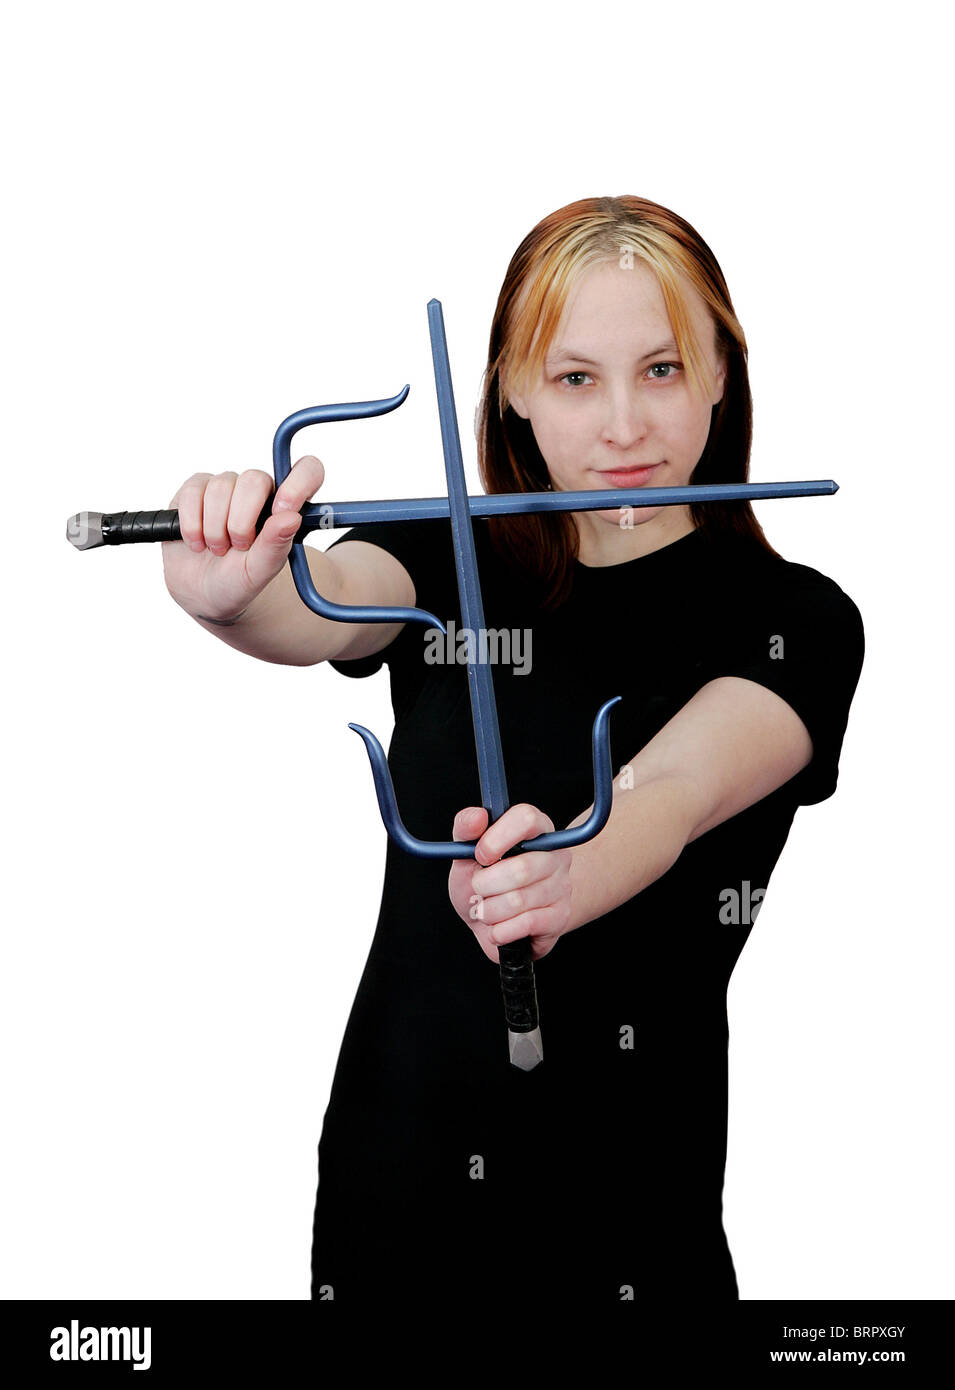 attractive female mma student with sai weapons ready to fight Stock Photo